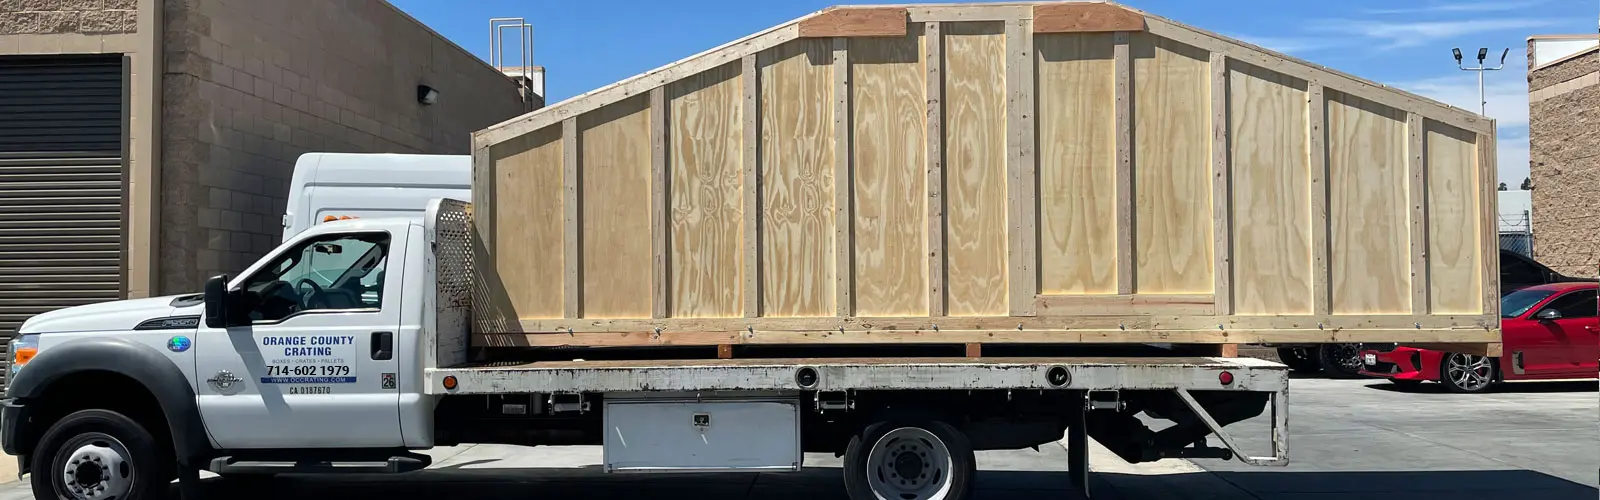 Crating, Packing & Shipping Services in Orange County, CA